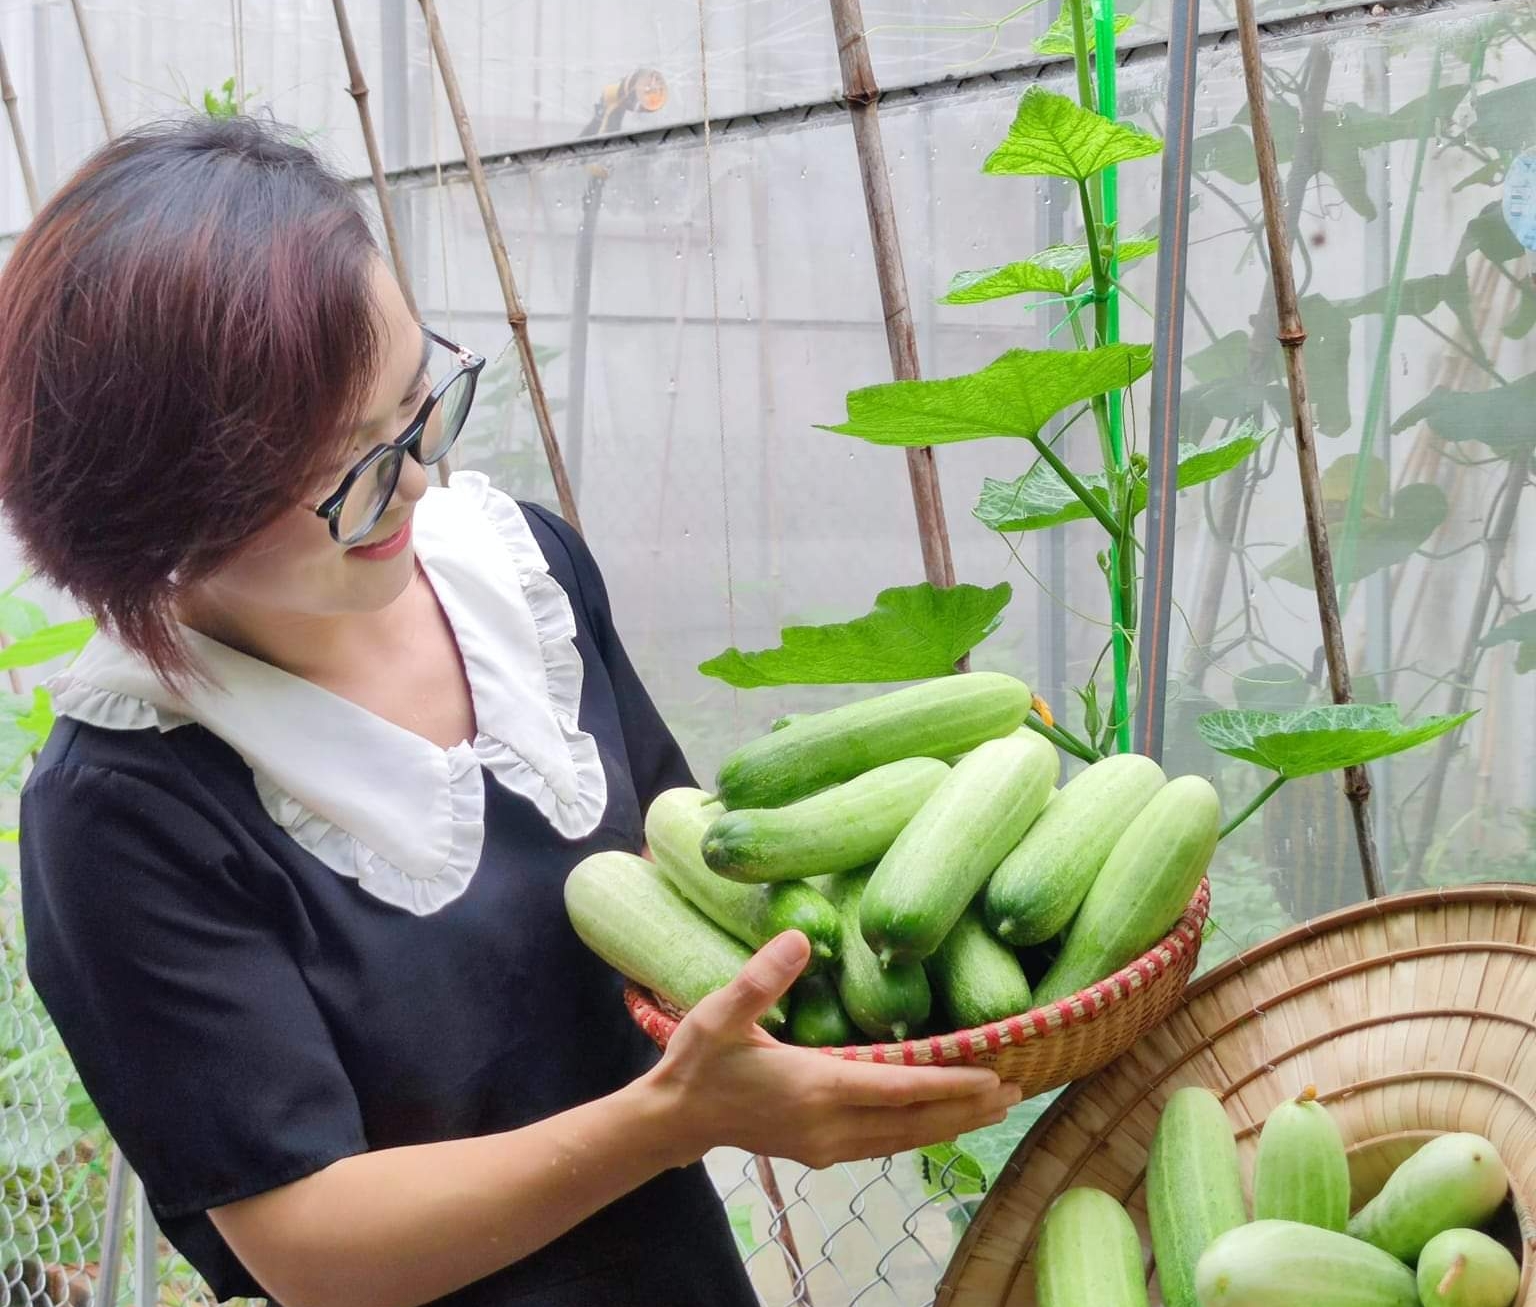 The organic cucumber garden of Ms. Vu Thi Thom's family. Photo: Dinh Muoi.